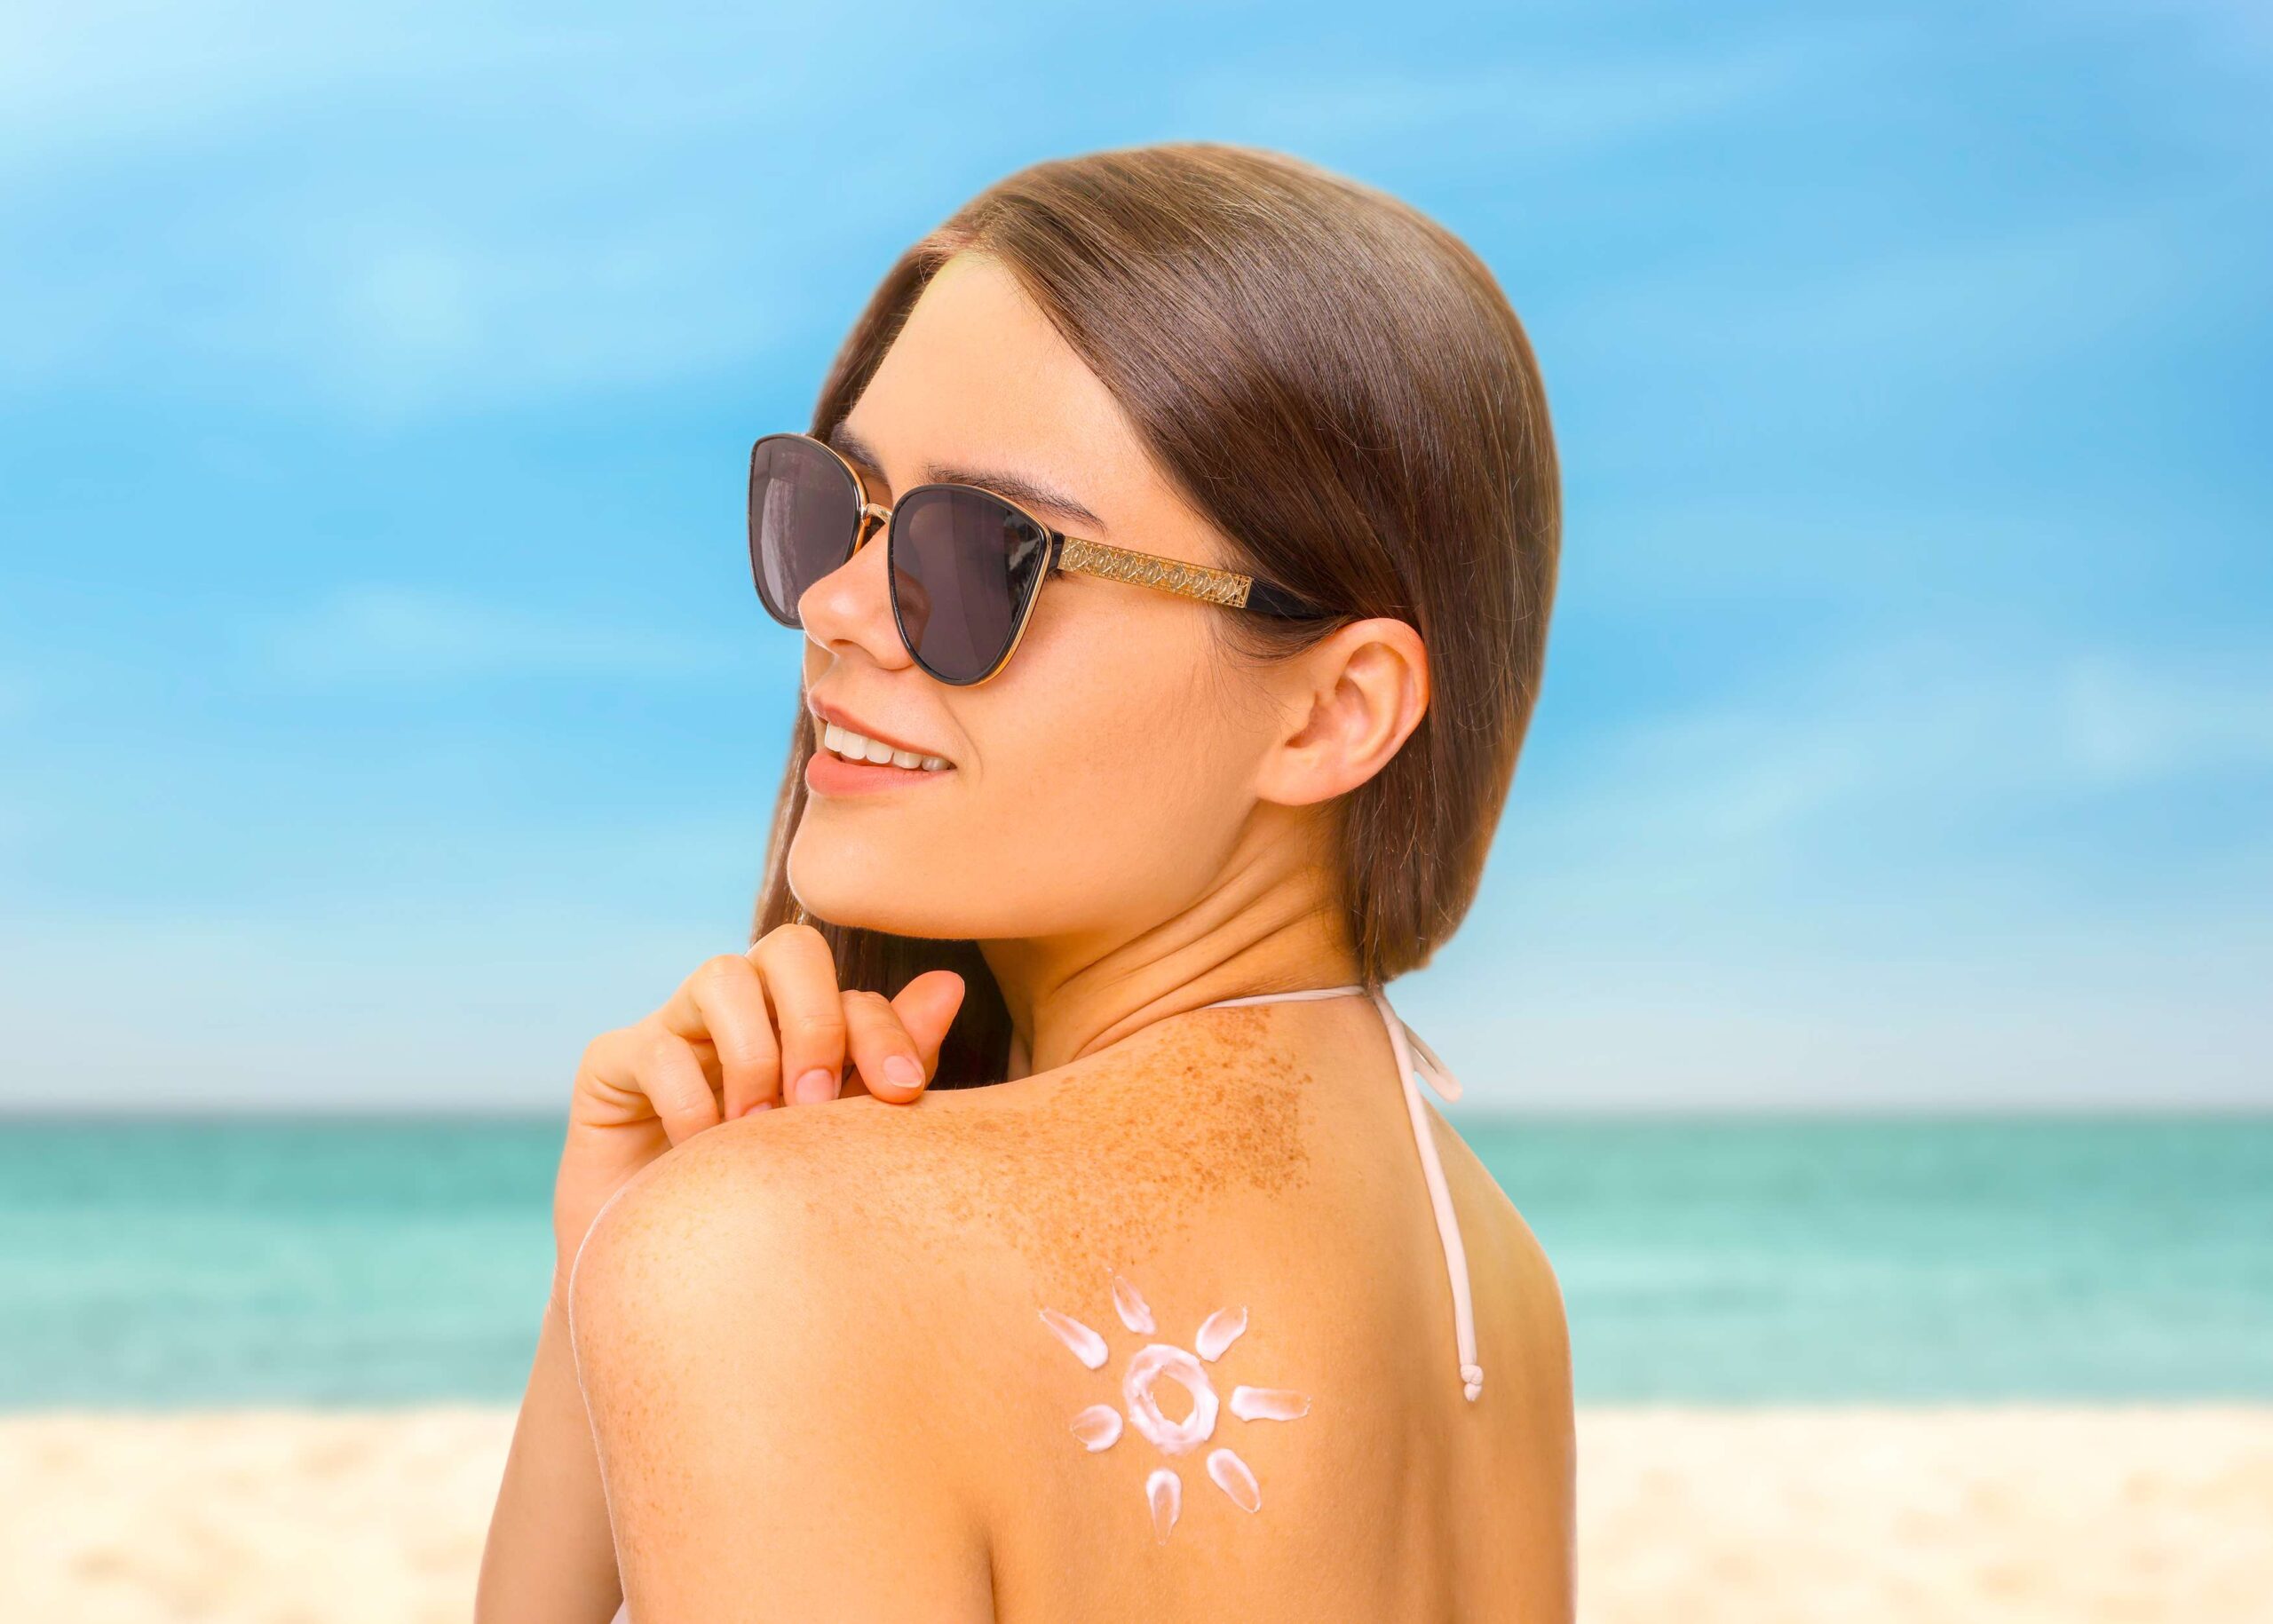 Beautiful women on beach | New Look Skin Center Medical Spa in Glendale, Encino and Irvine, CA